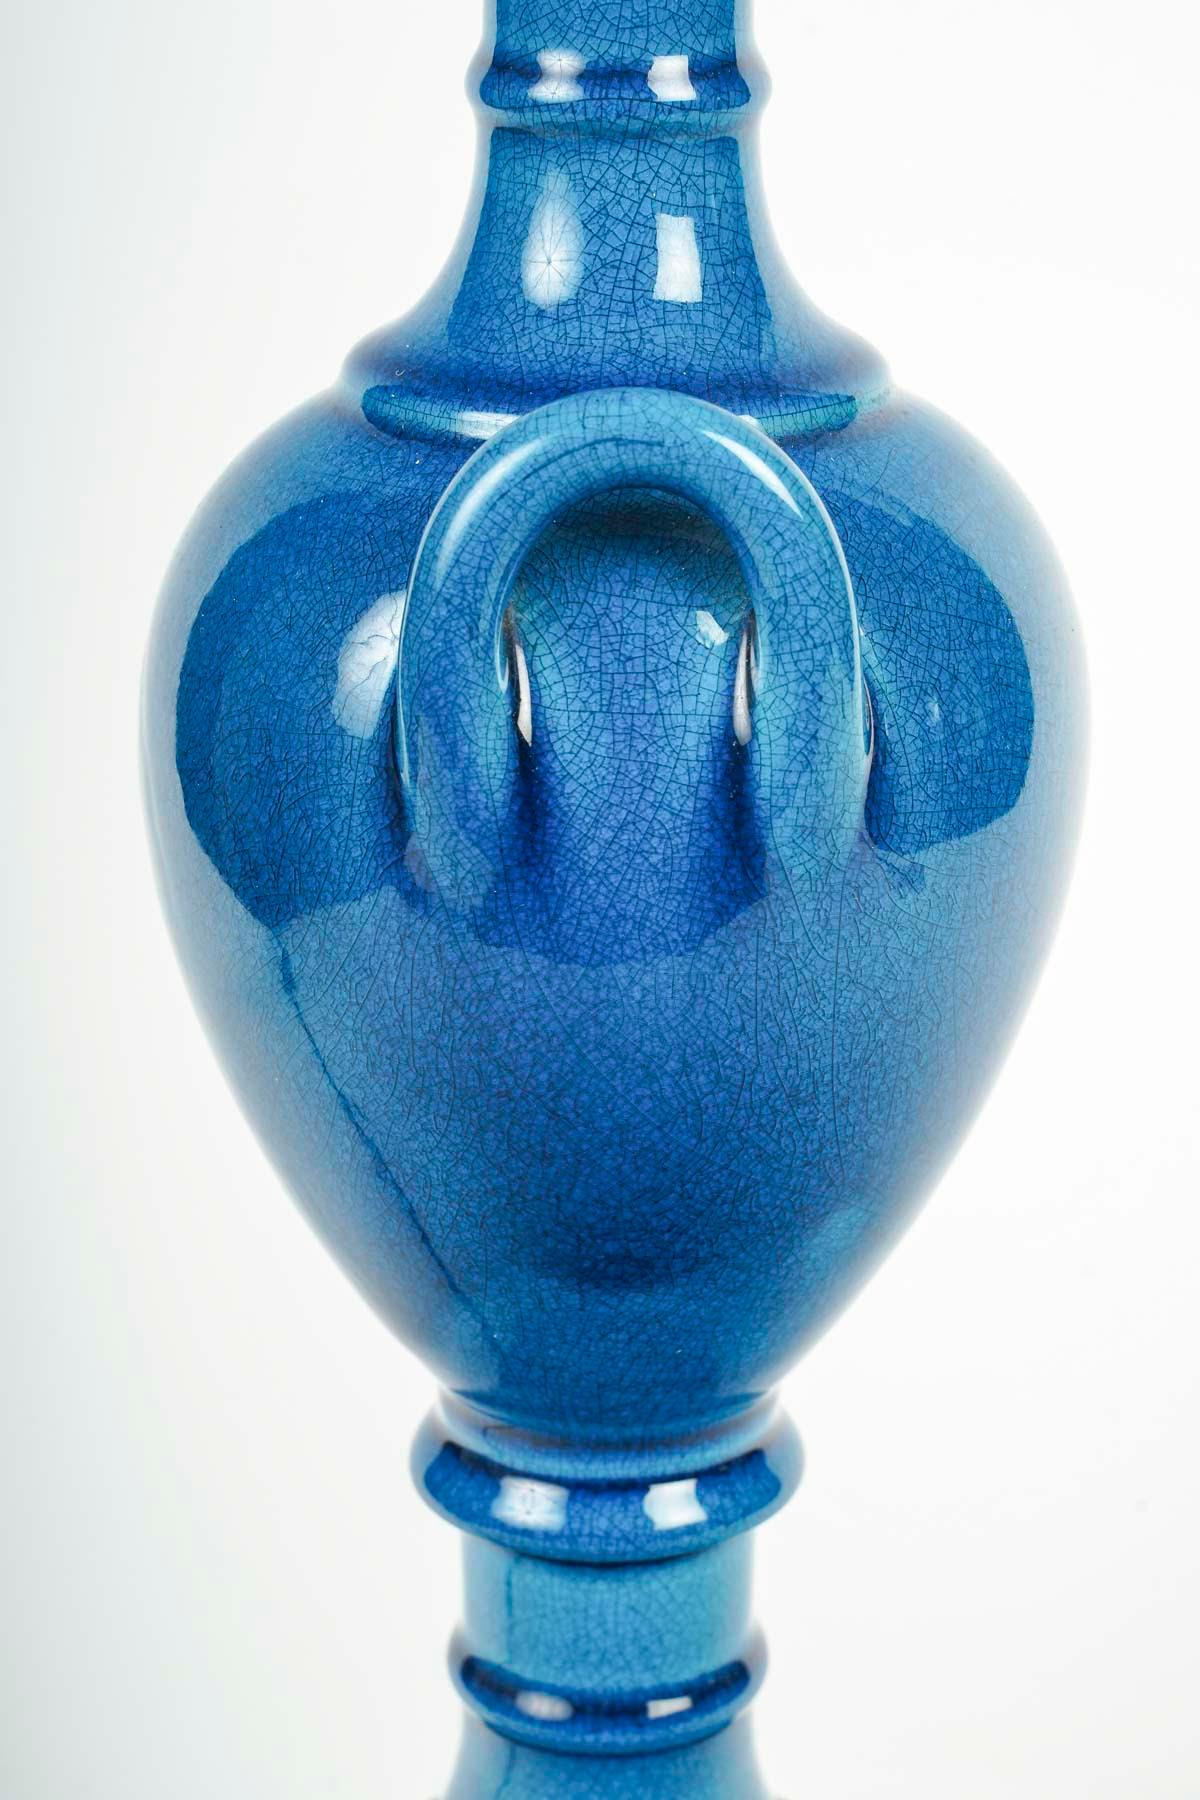 French Pair of Table Lamps by Pol Chambost (1906-1983), Blue Glazed Earthenware. For Sale